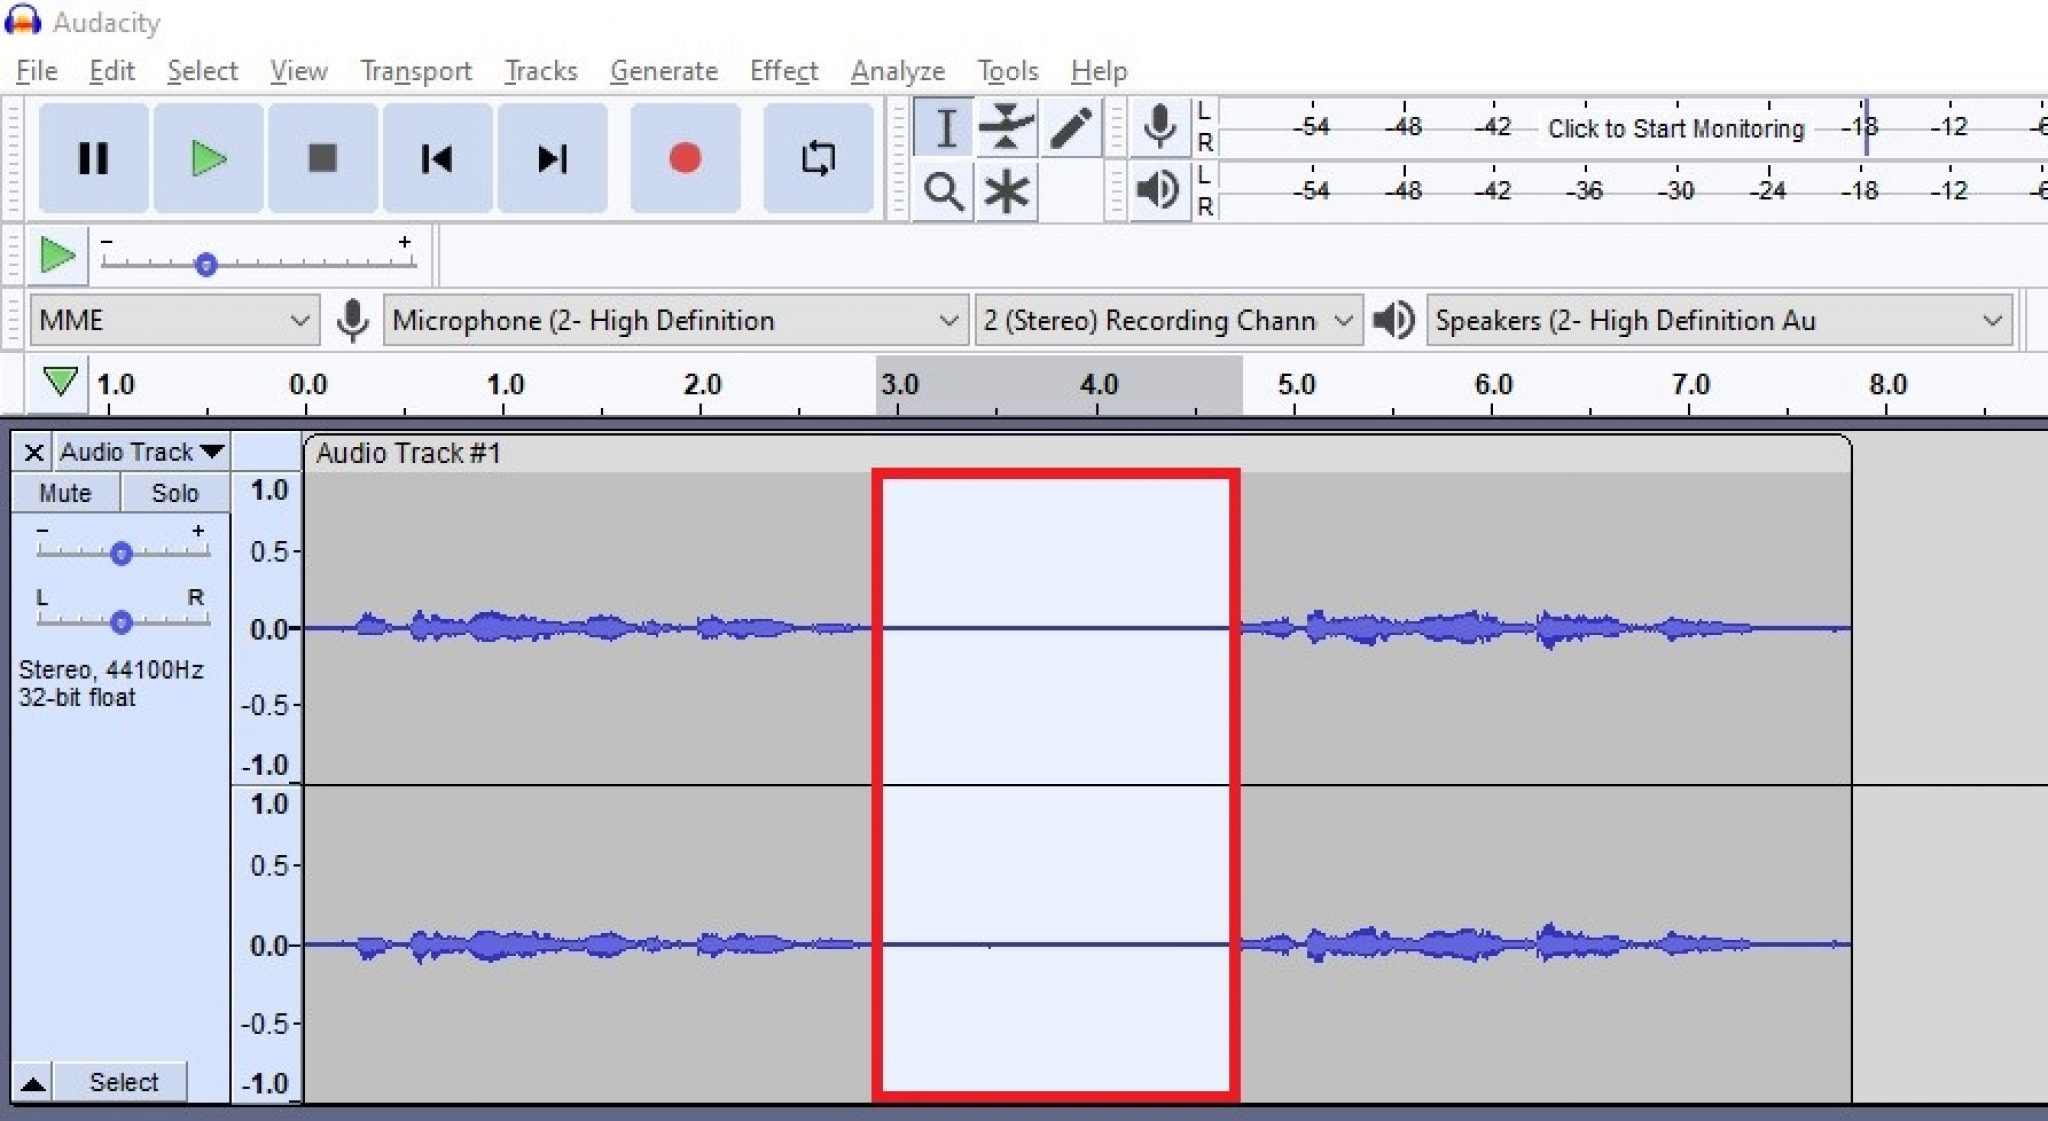 How To Remove Background Noise In Audacity